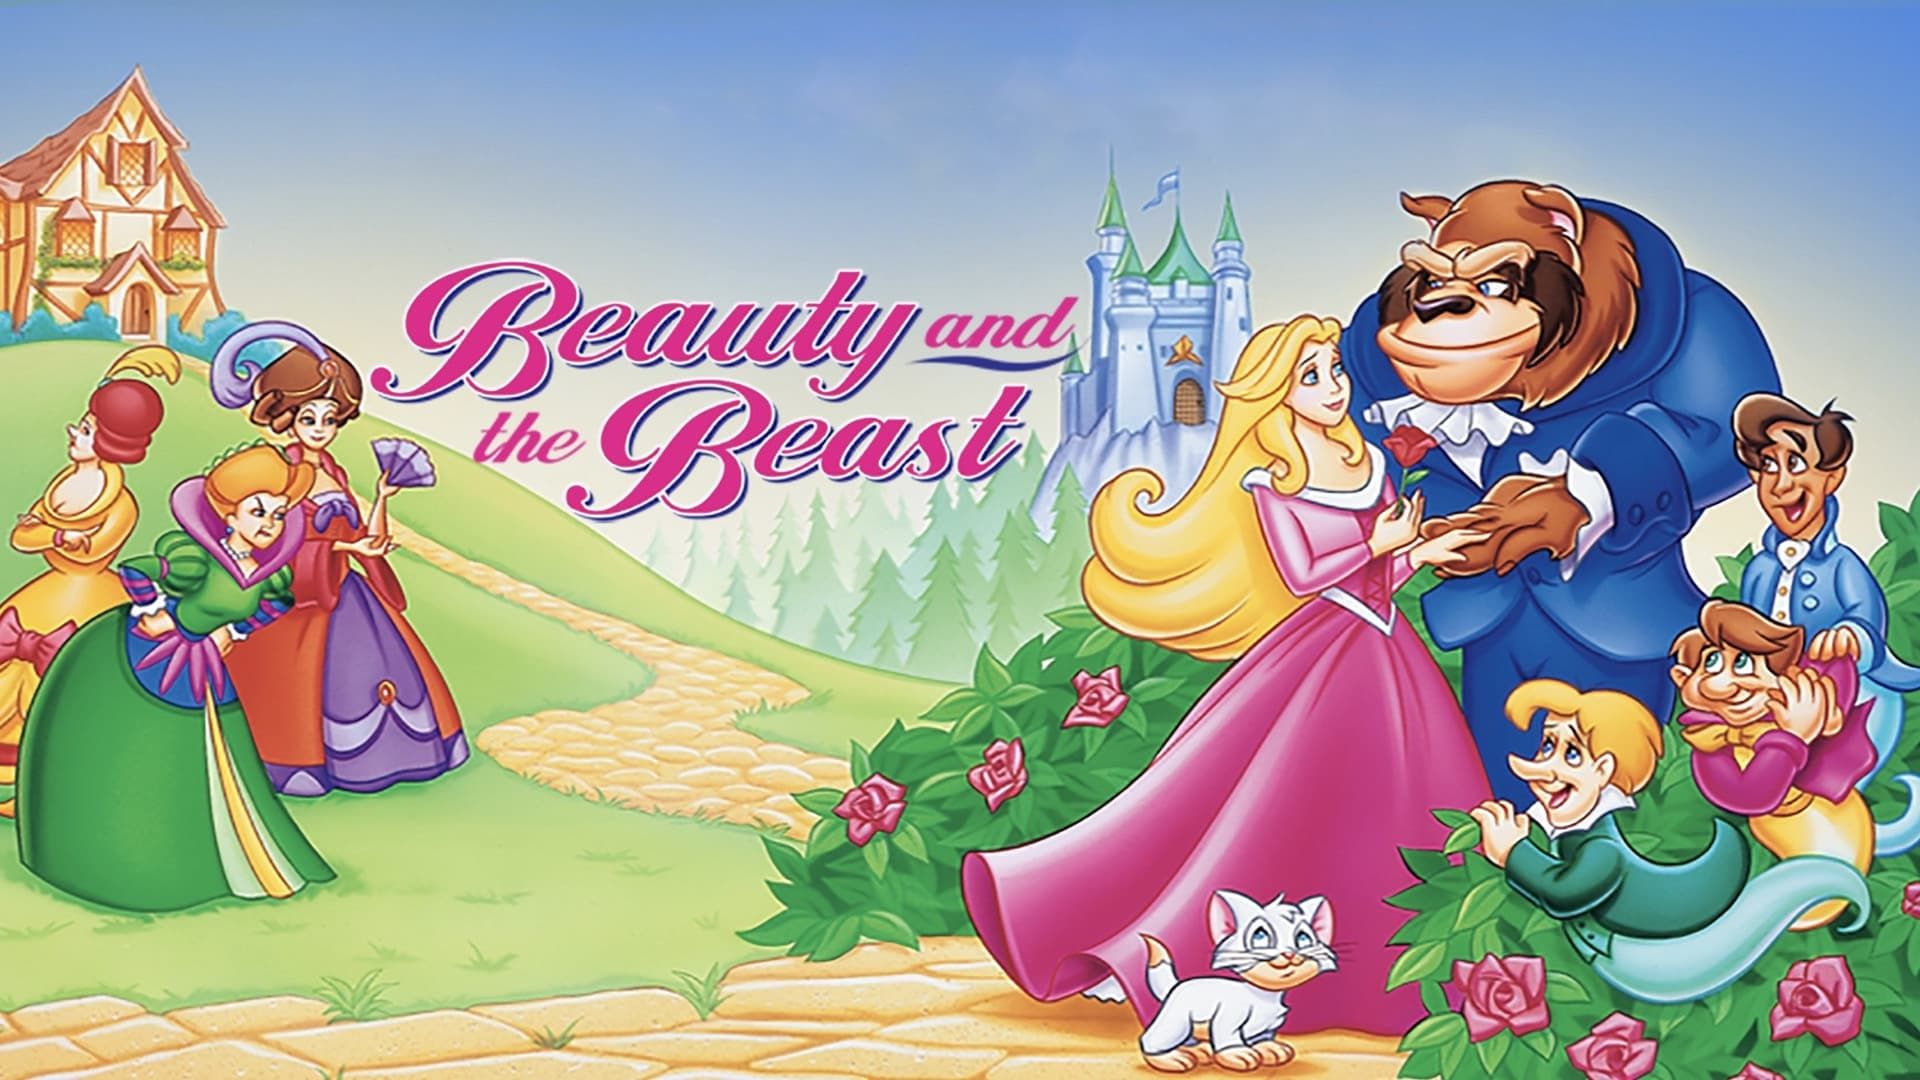 Beauty and the Beast background